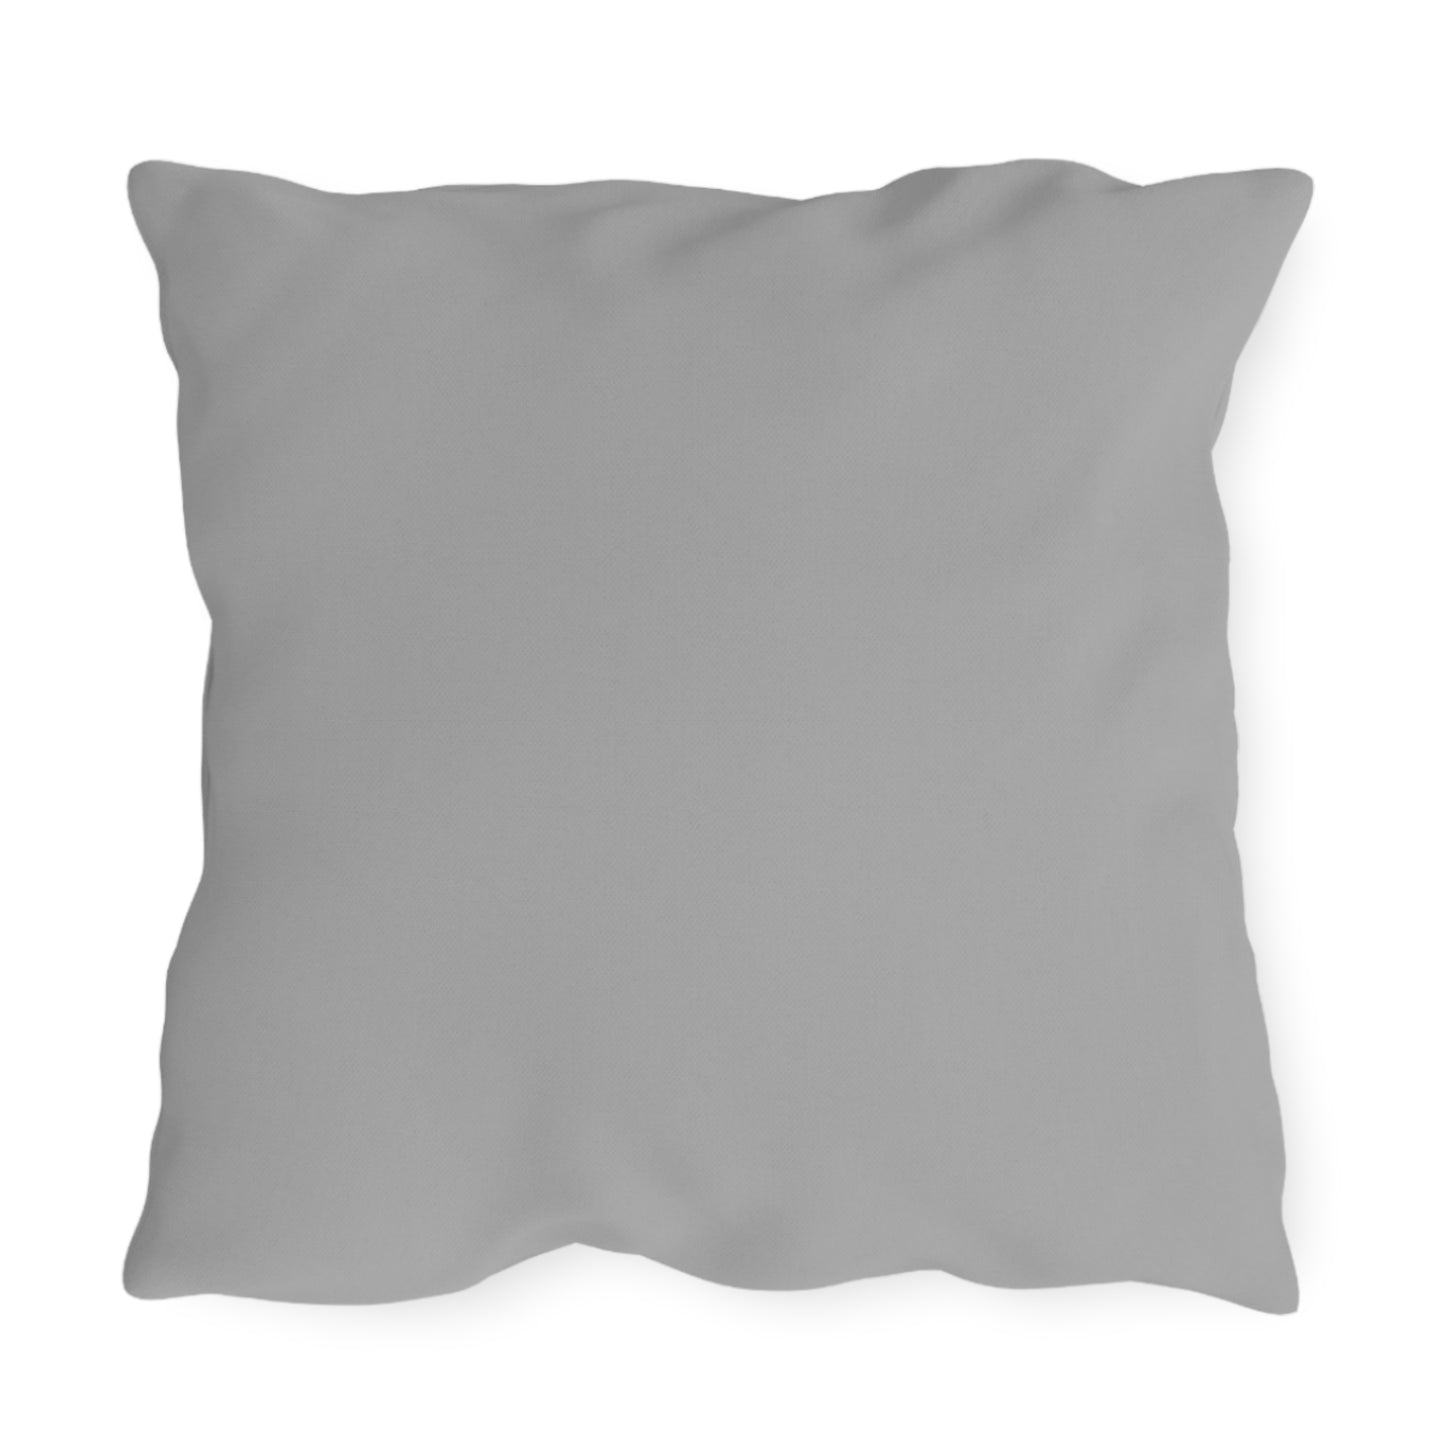 NNB - Chatham Clams Outdoor Pillows